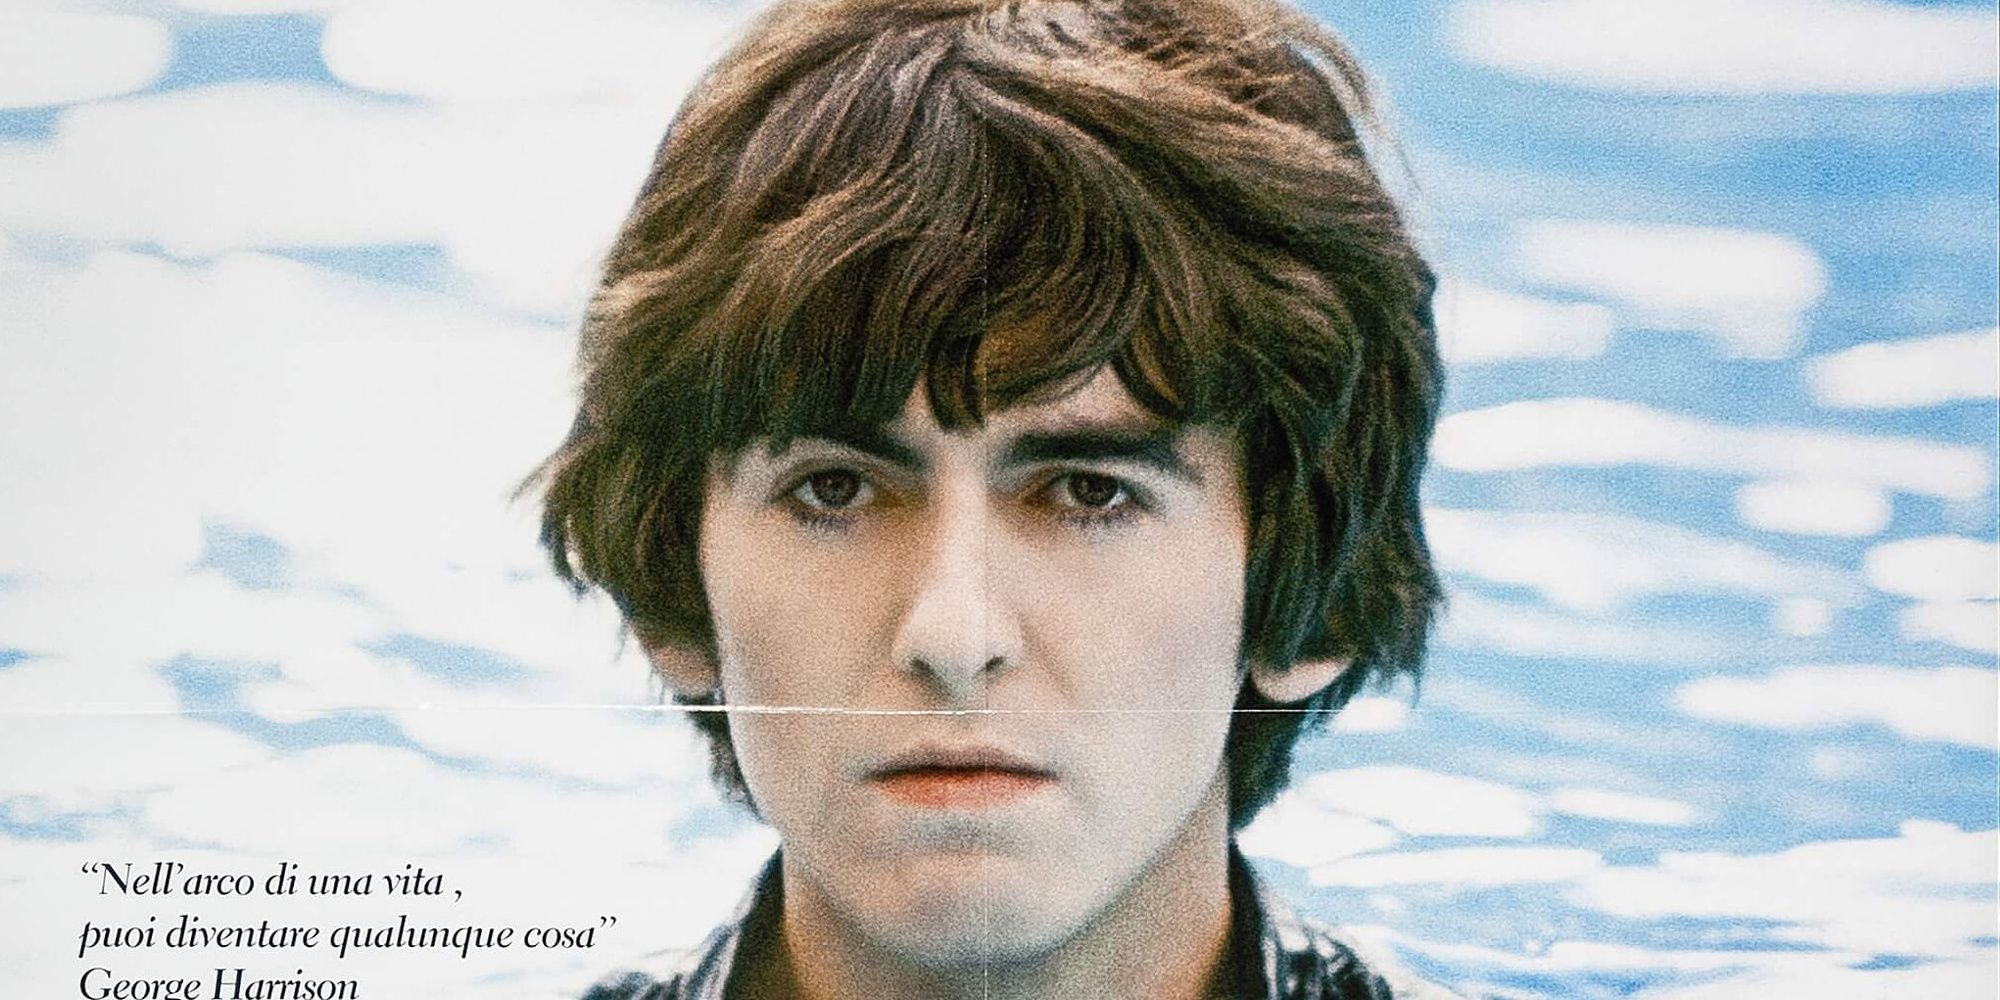 George Harrison Living In The Material World release poster 